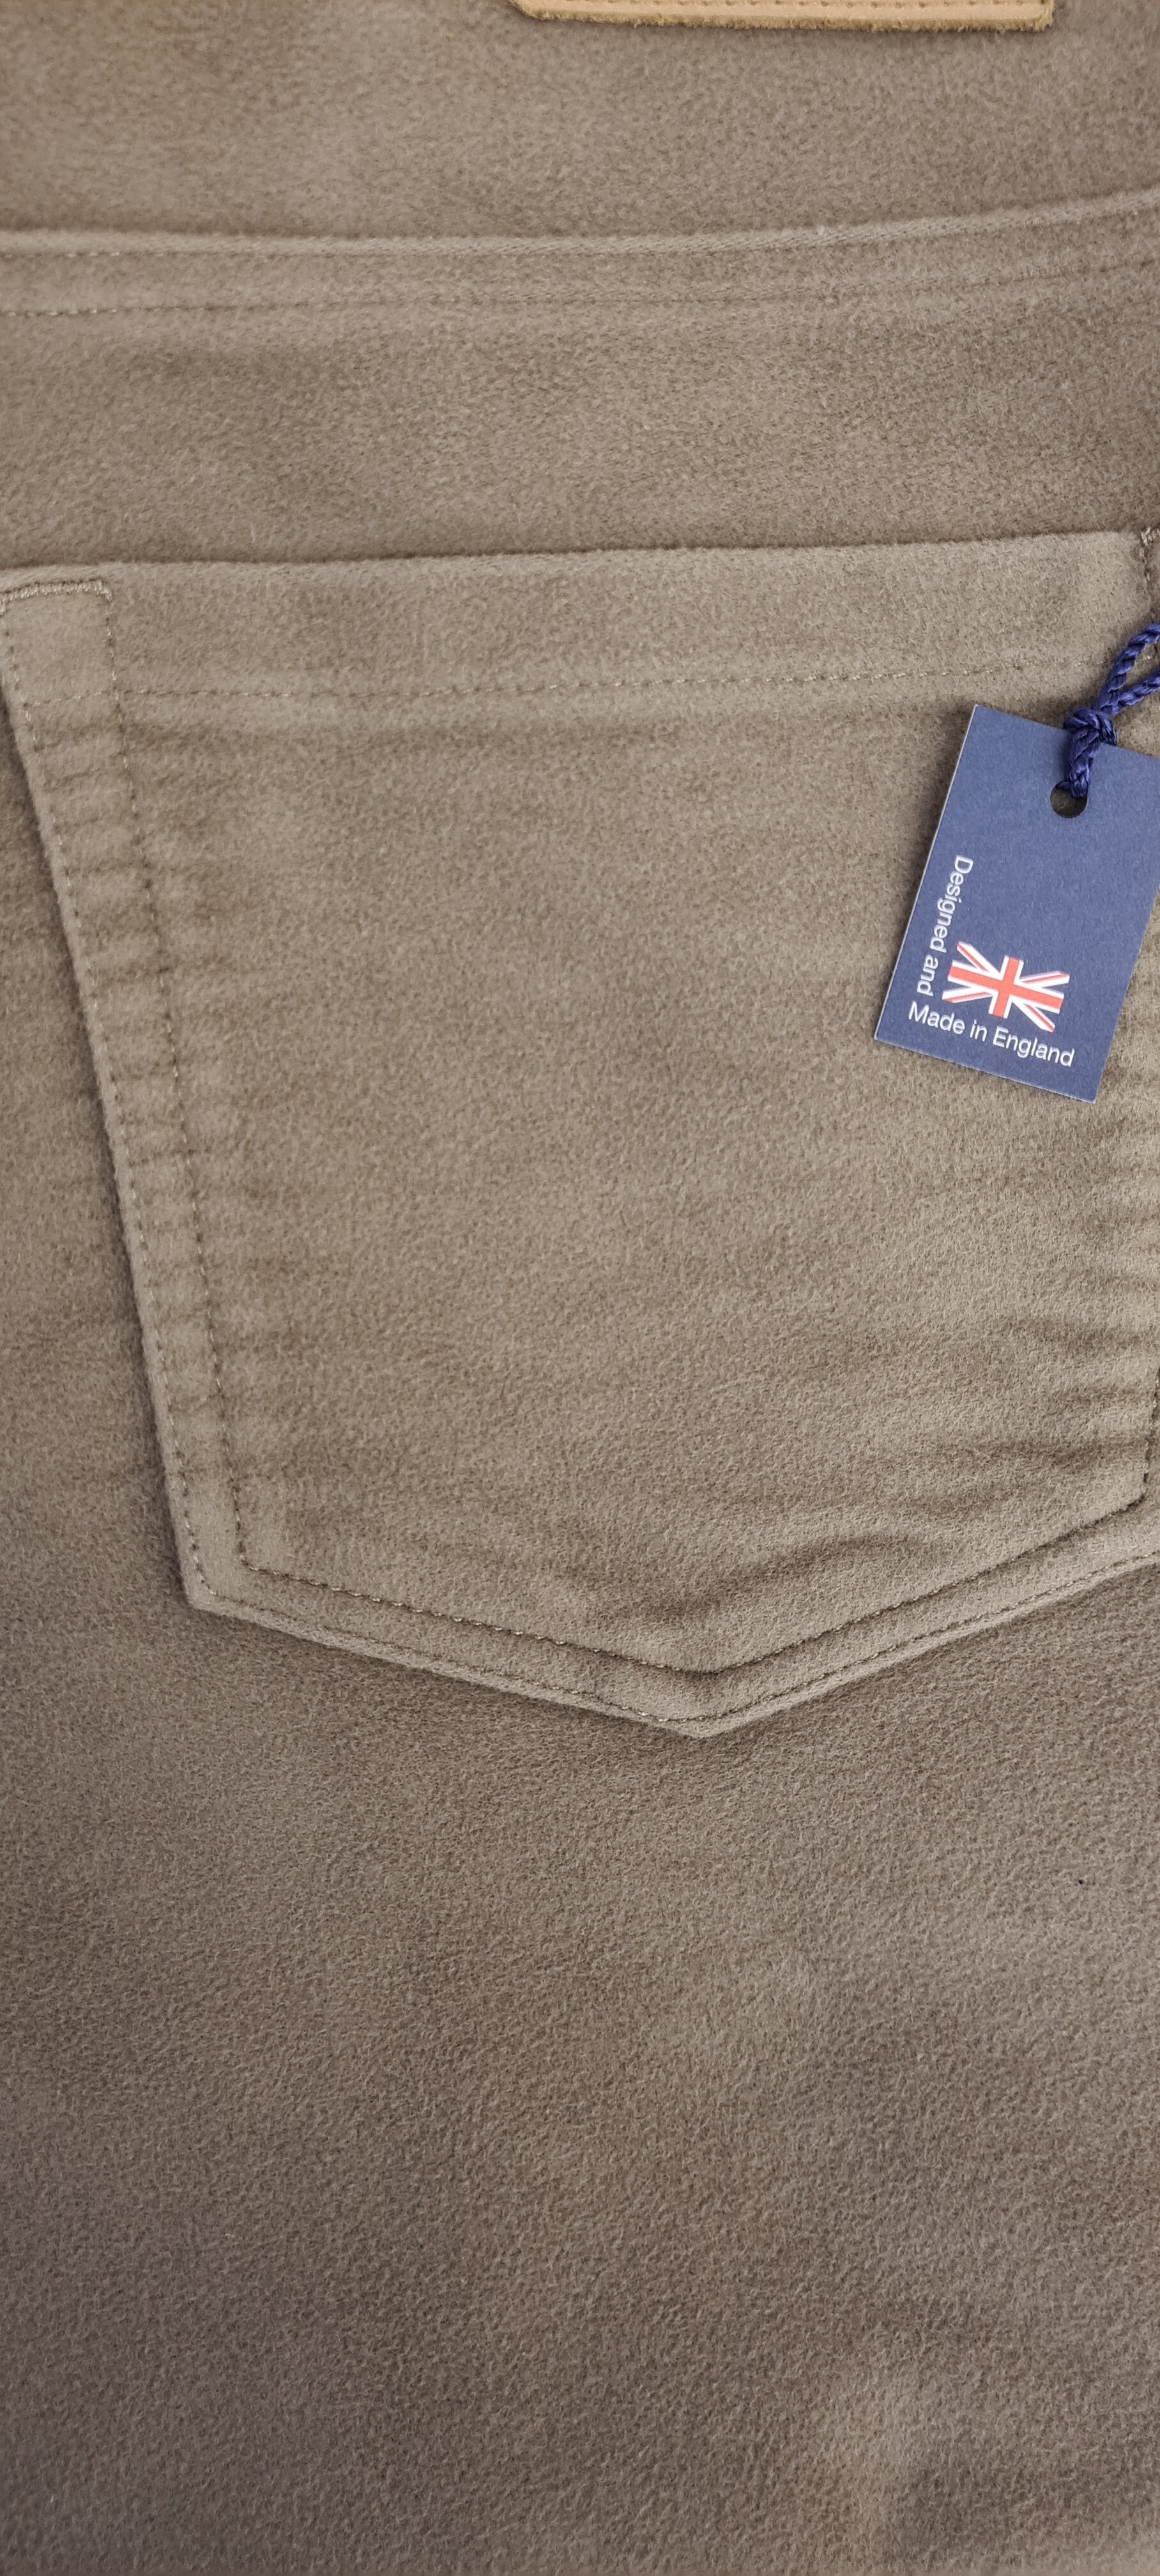 Made in Britain| Made to Measure| Mens Cotton Jeans| Straight Leg ...